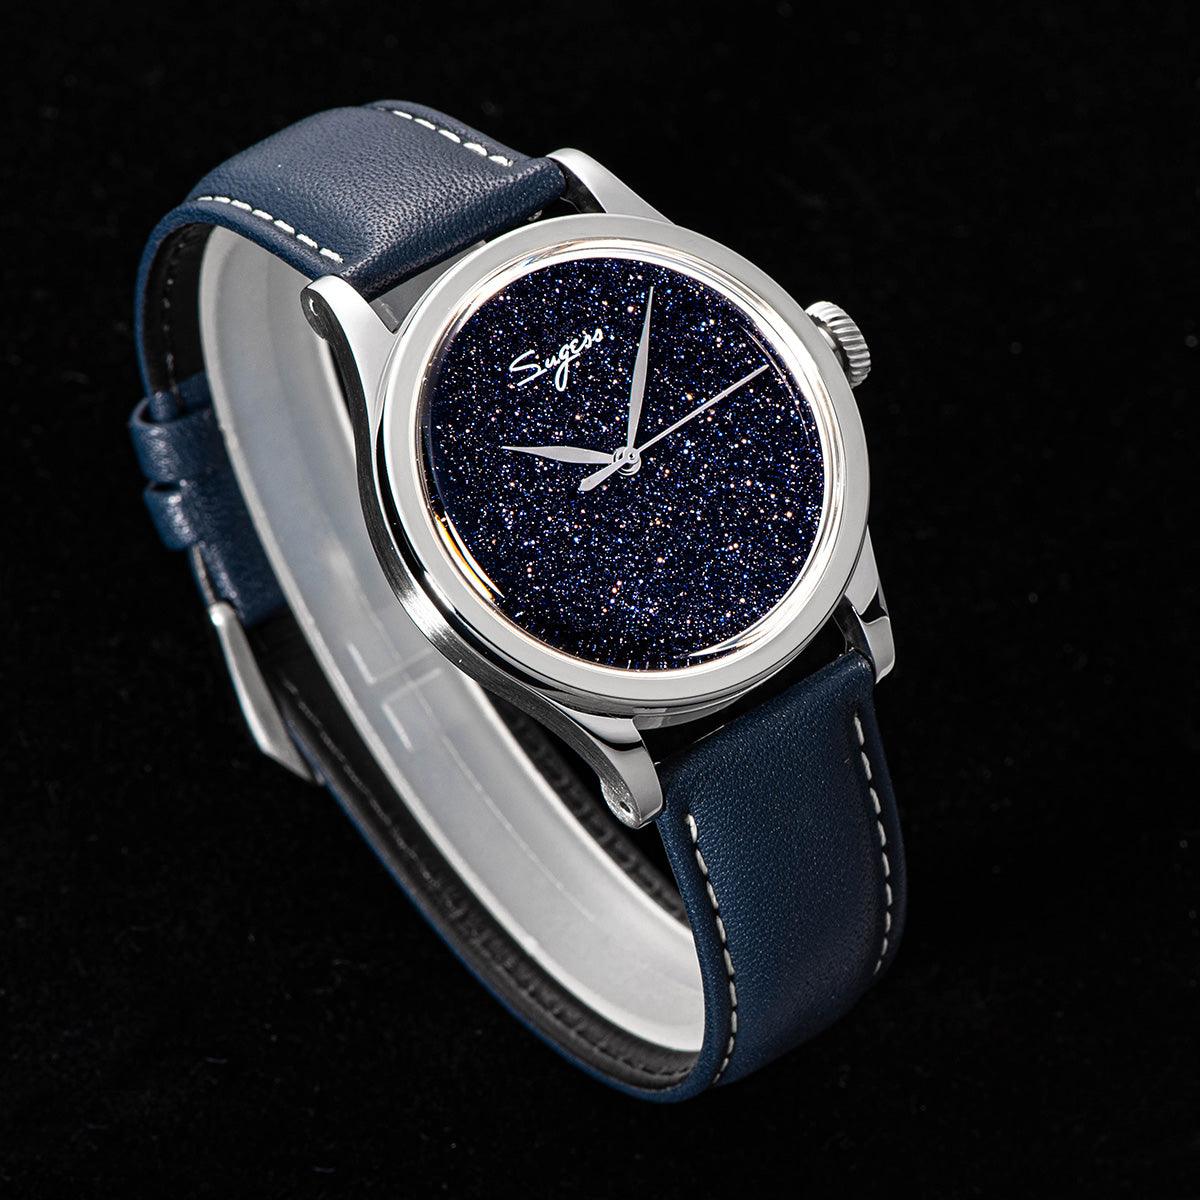 Sugess Blue Sandstone Stainless Steel Mechanical Watch with ST2130 Seagull Movement - Murphy Johnson Watches Co.